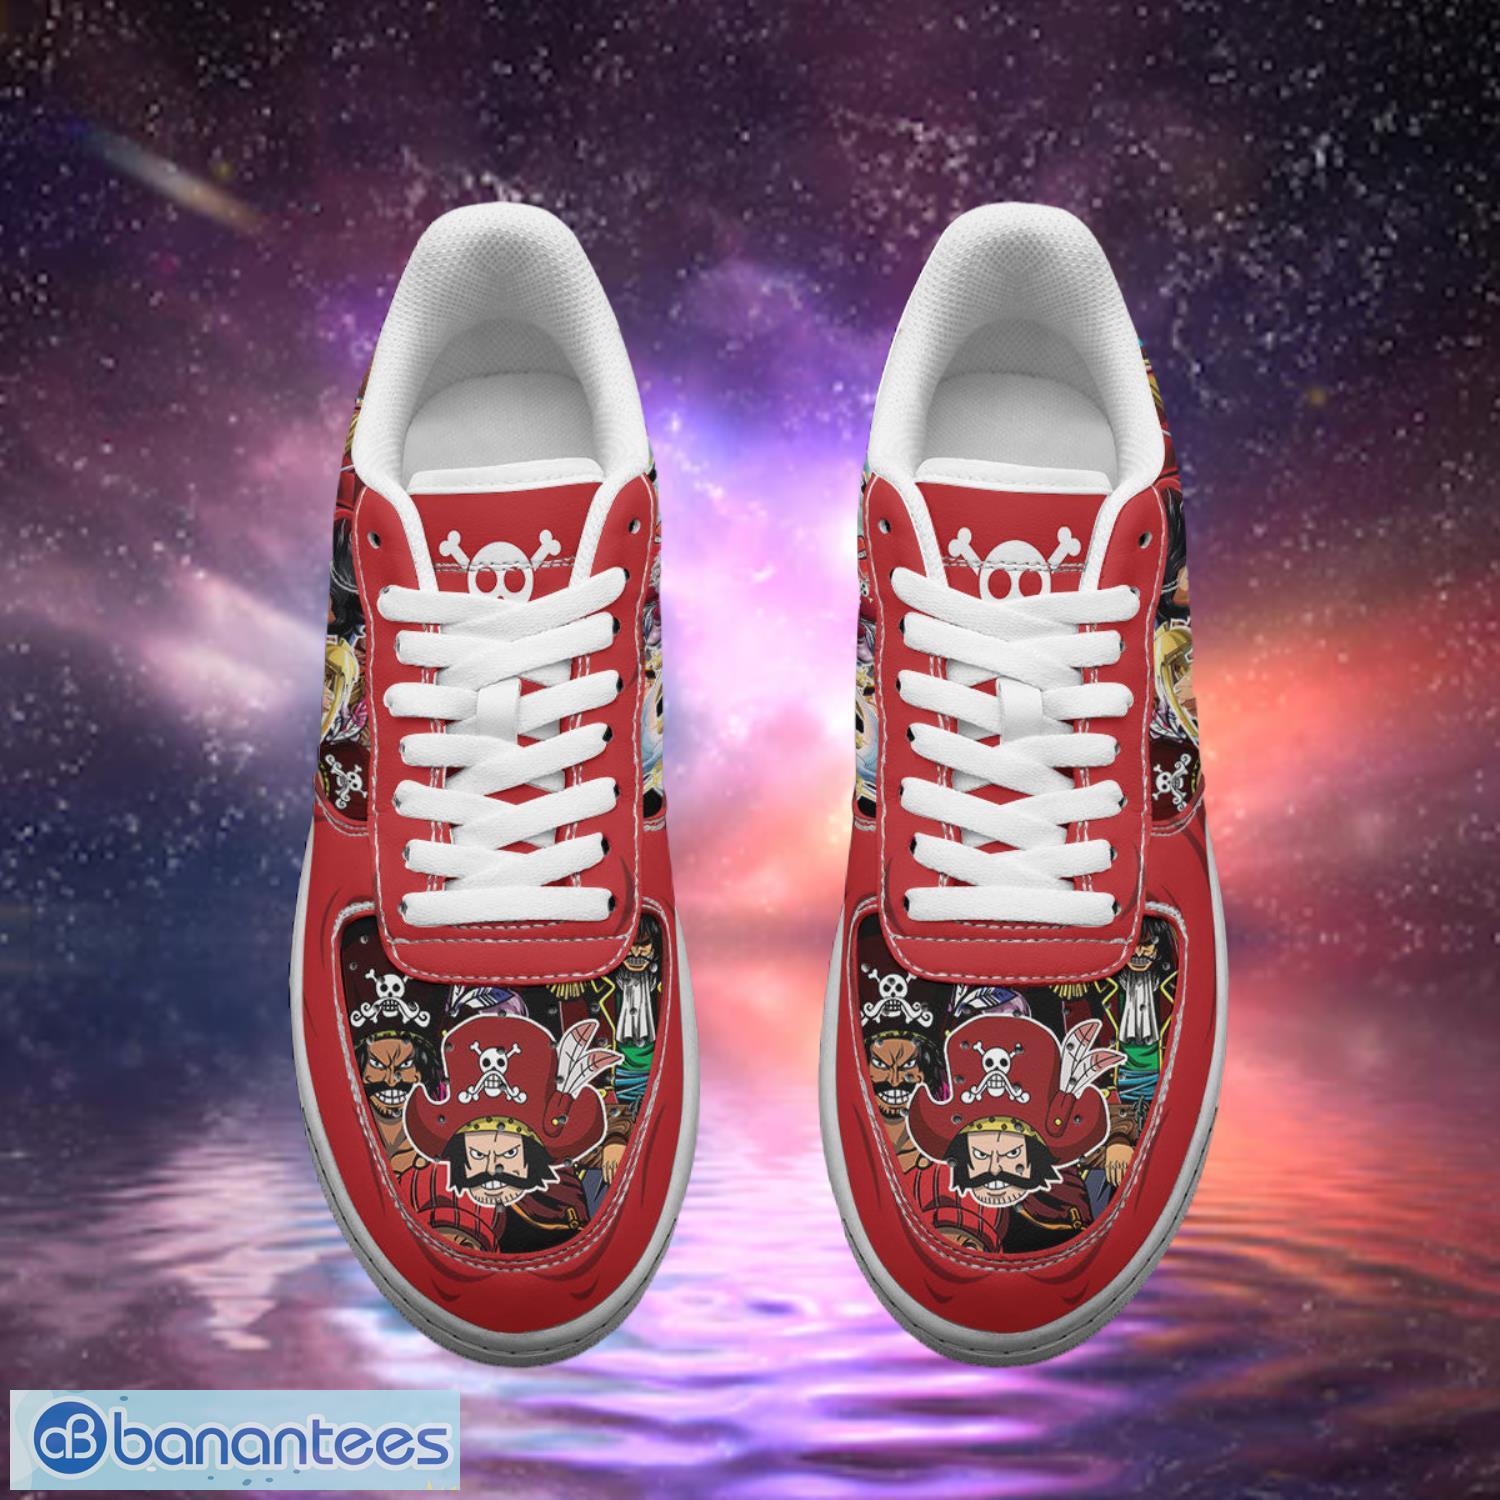 One Piece Gol D Roger Air Sneakers Custom Anime Shoes - Banantees